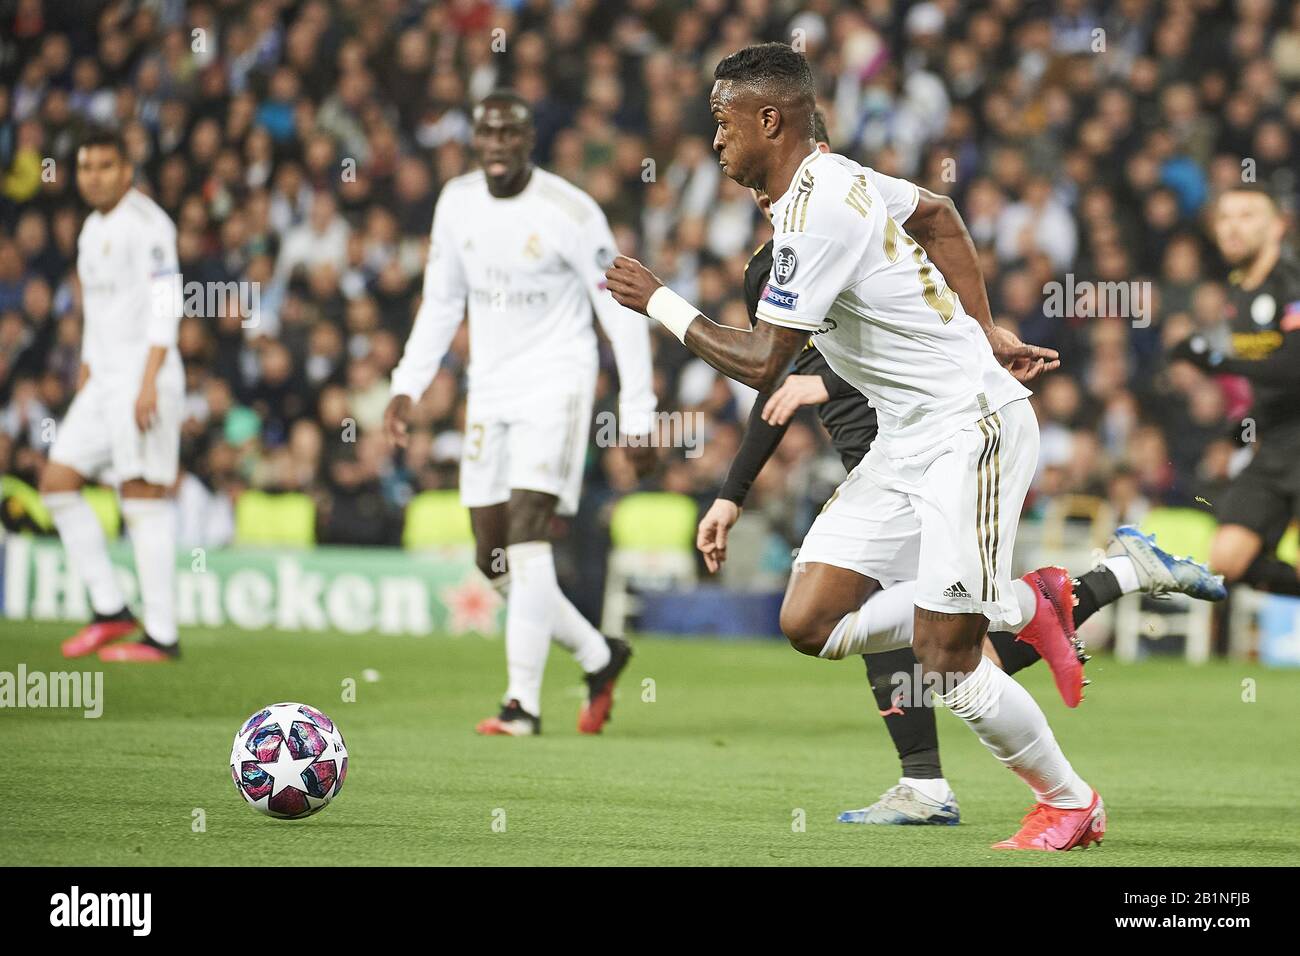 Madrid, Spain. 26th Feb, 2020. Vinicius Junior (forward; Real Madrid) in action during the UEFA Champions League round of 16 first leg match between Real Madrid and Manchester City F.C. at Santiago Bernabeu on February 26, 2020 in Madrid, Spain Credit: Jack Abuin/ZUMA Wire/Alamy Live News Stock Photo